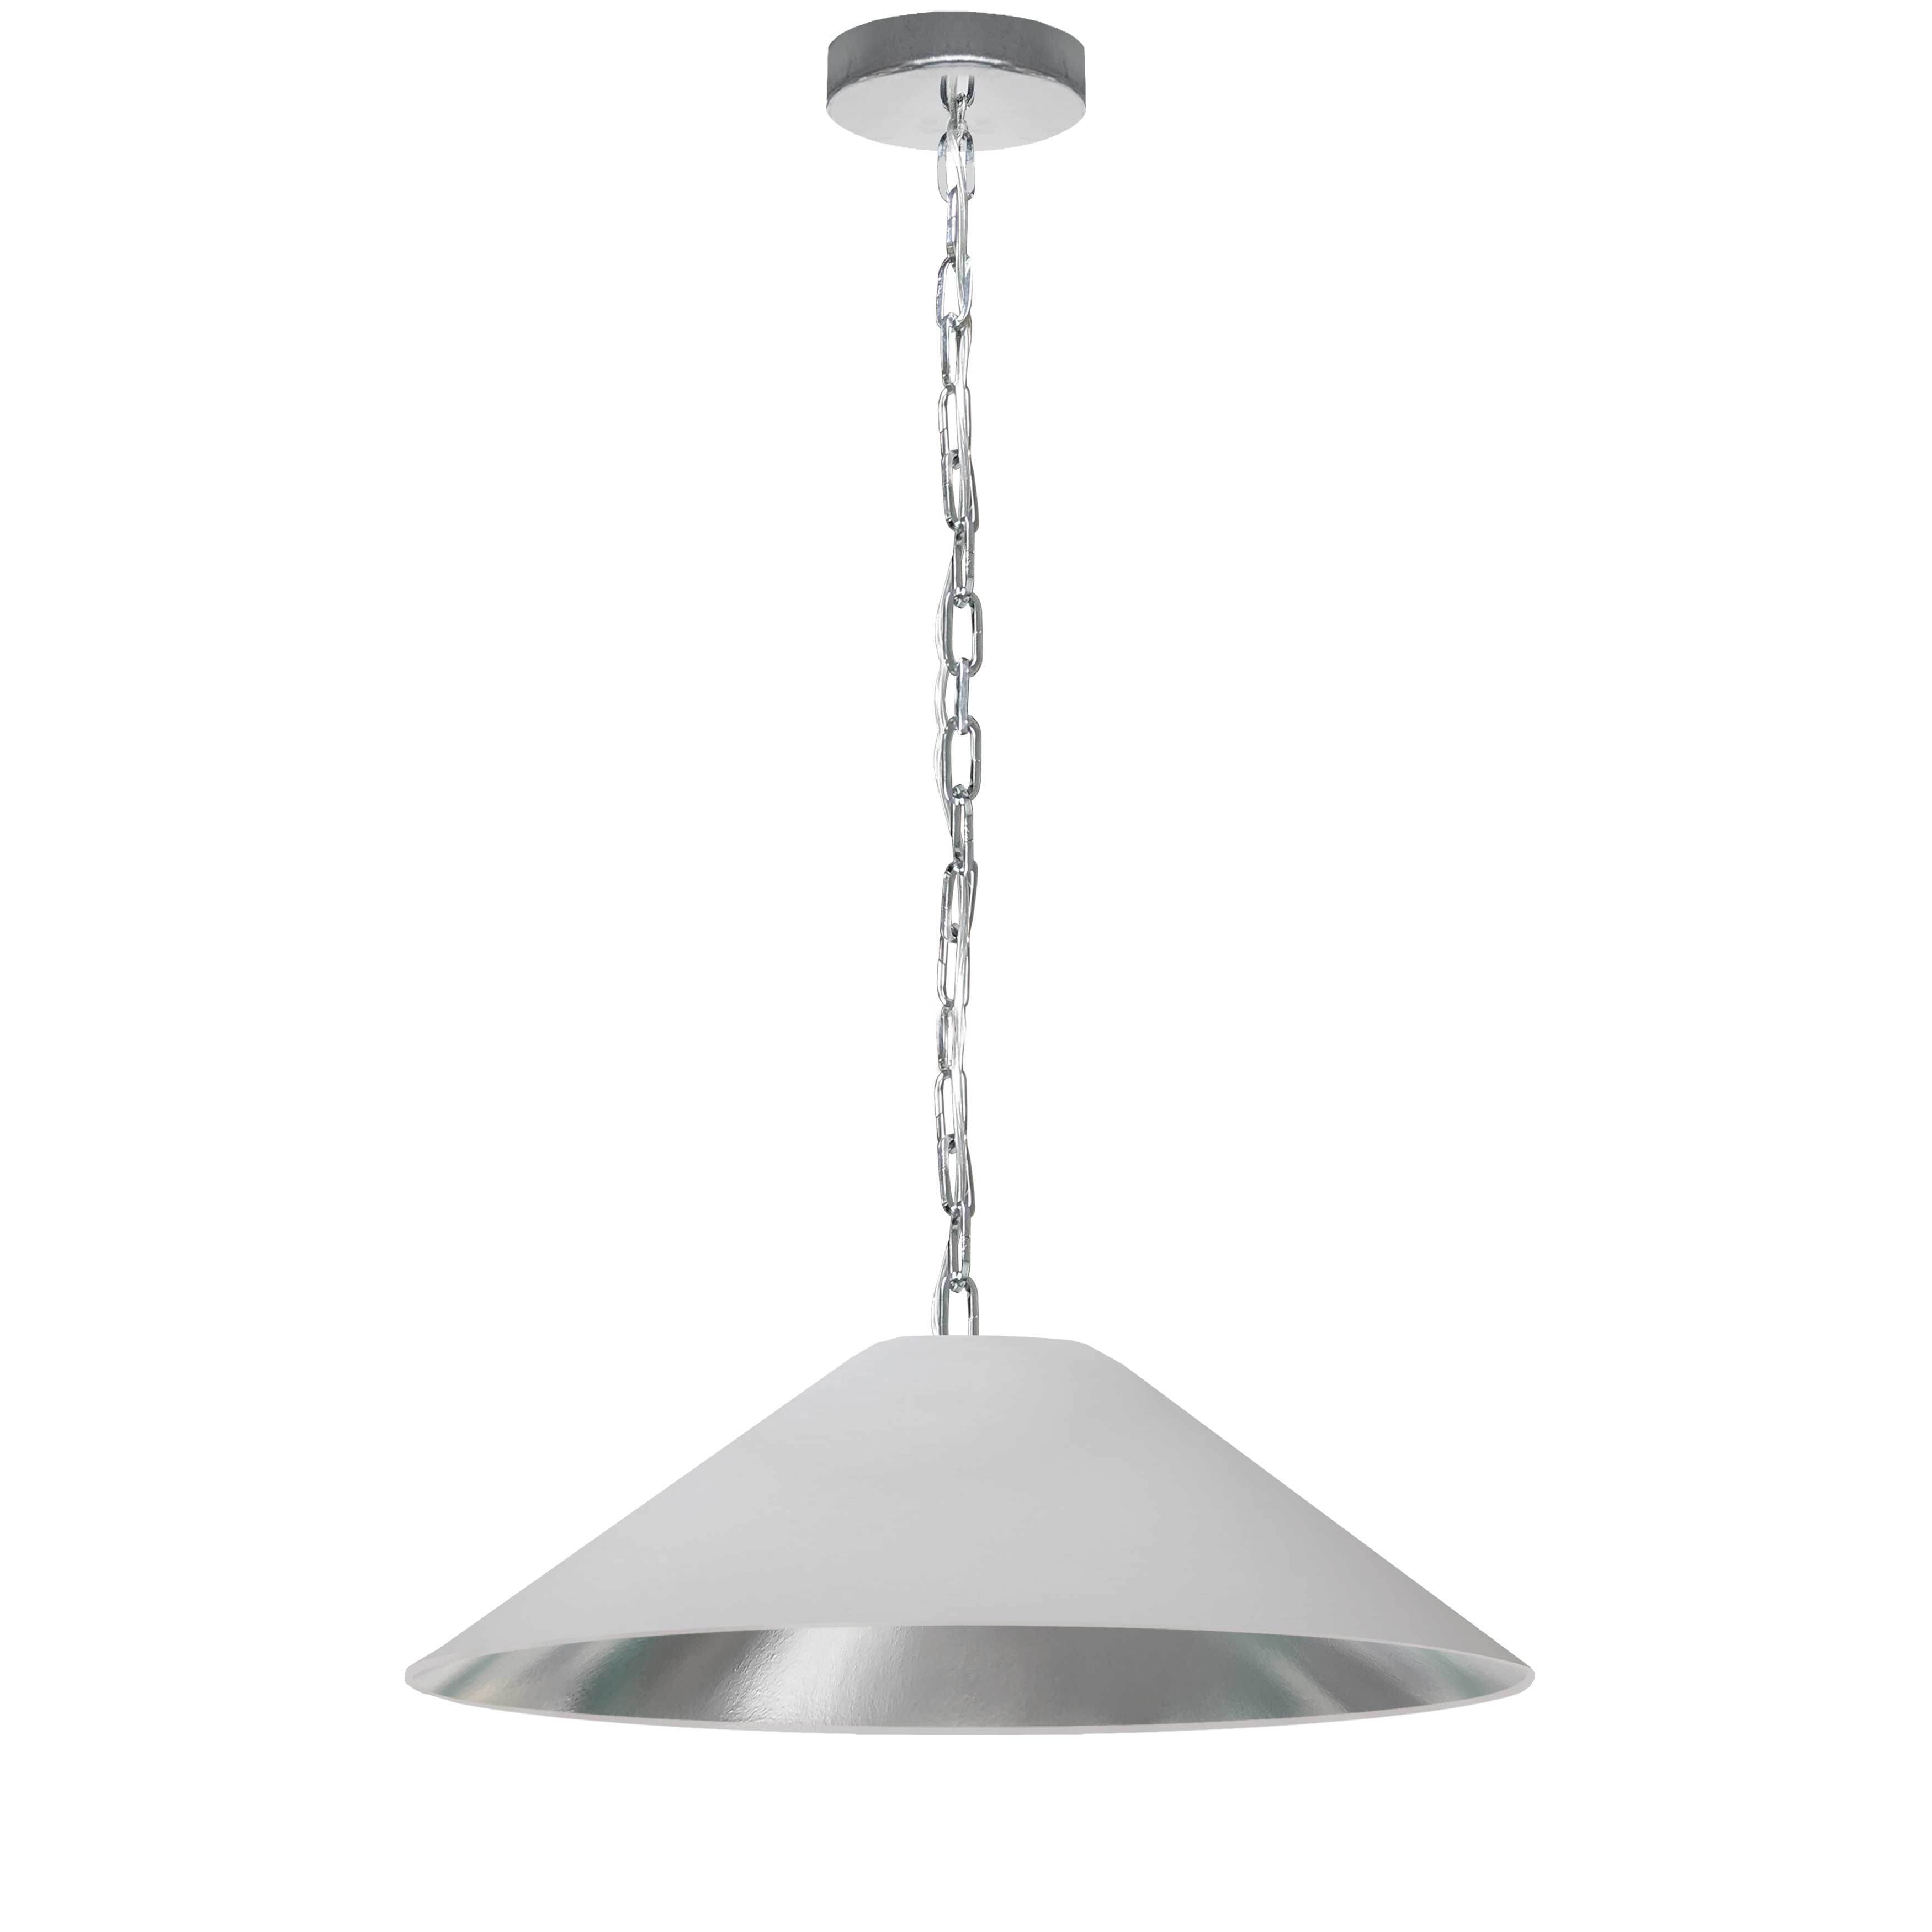 1 Light Incandescent Pendant, Polished Chrome  with White / Silver Shade